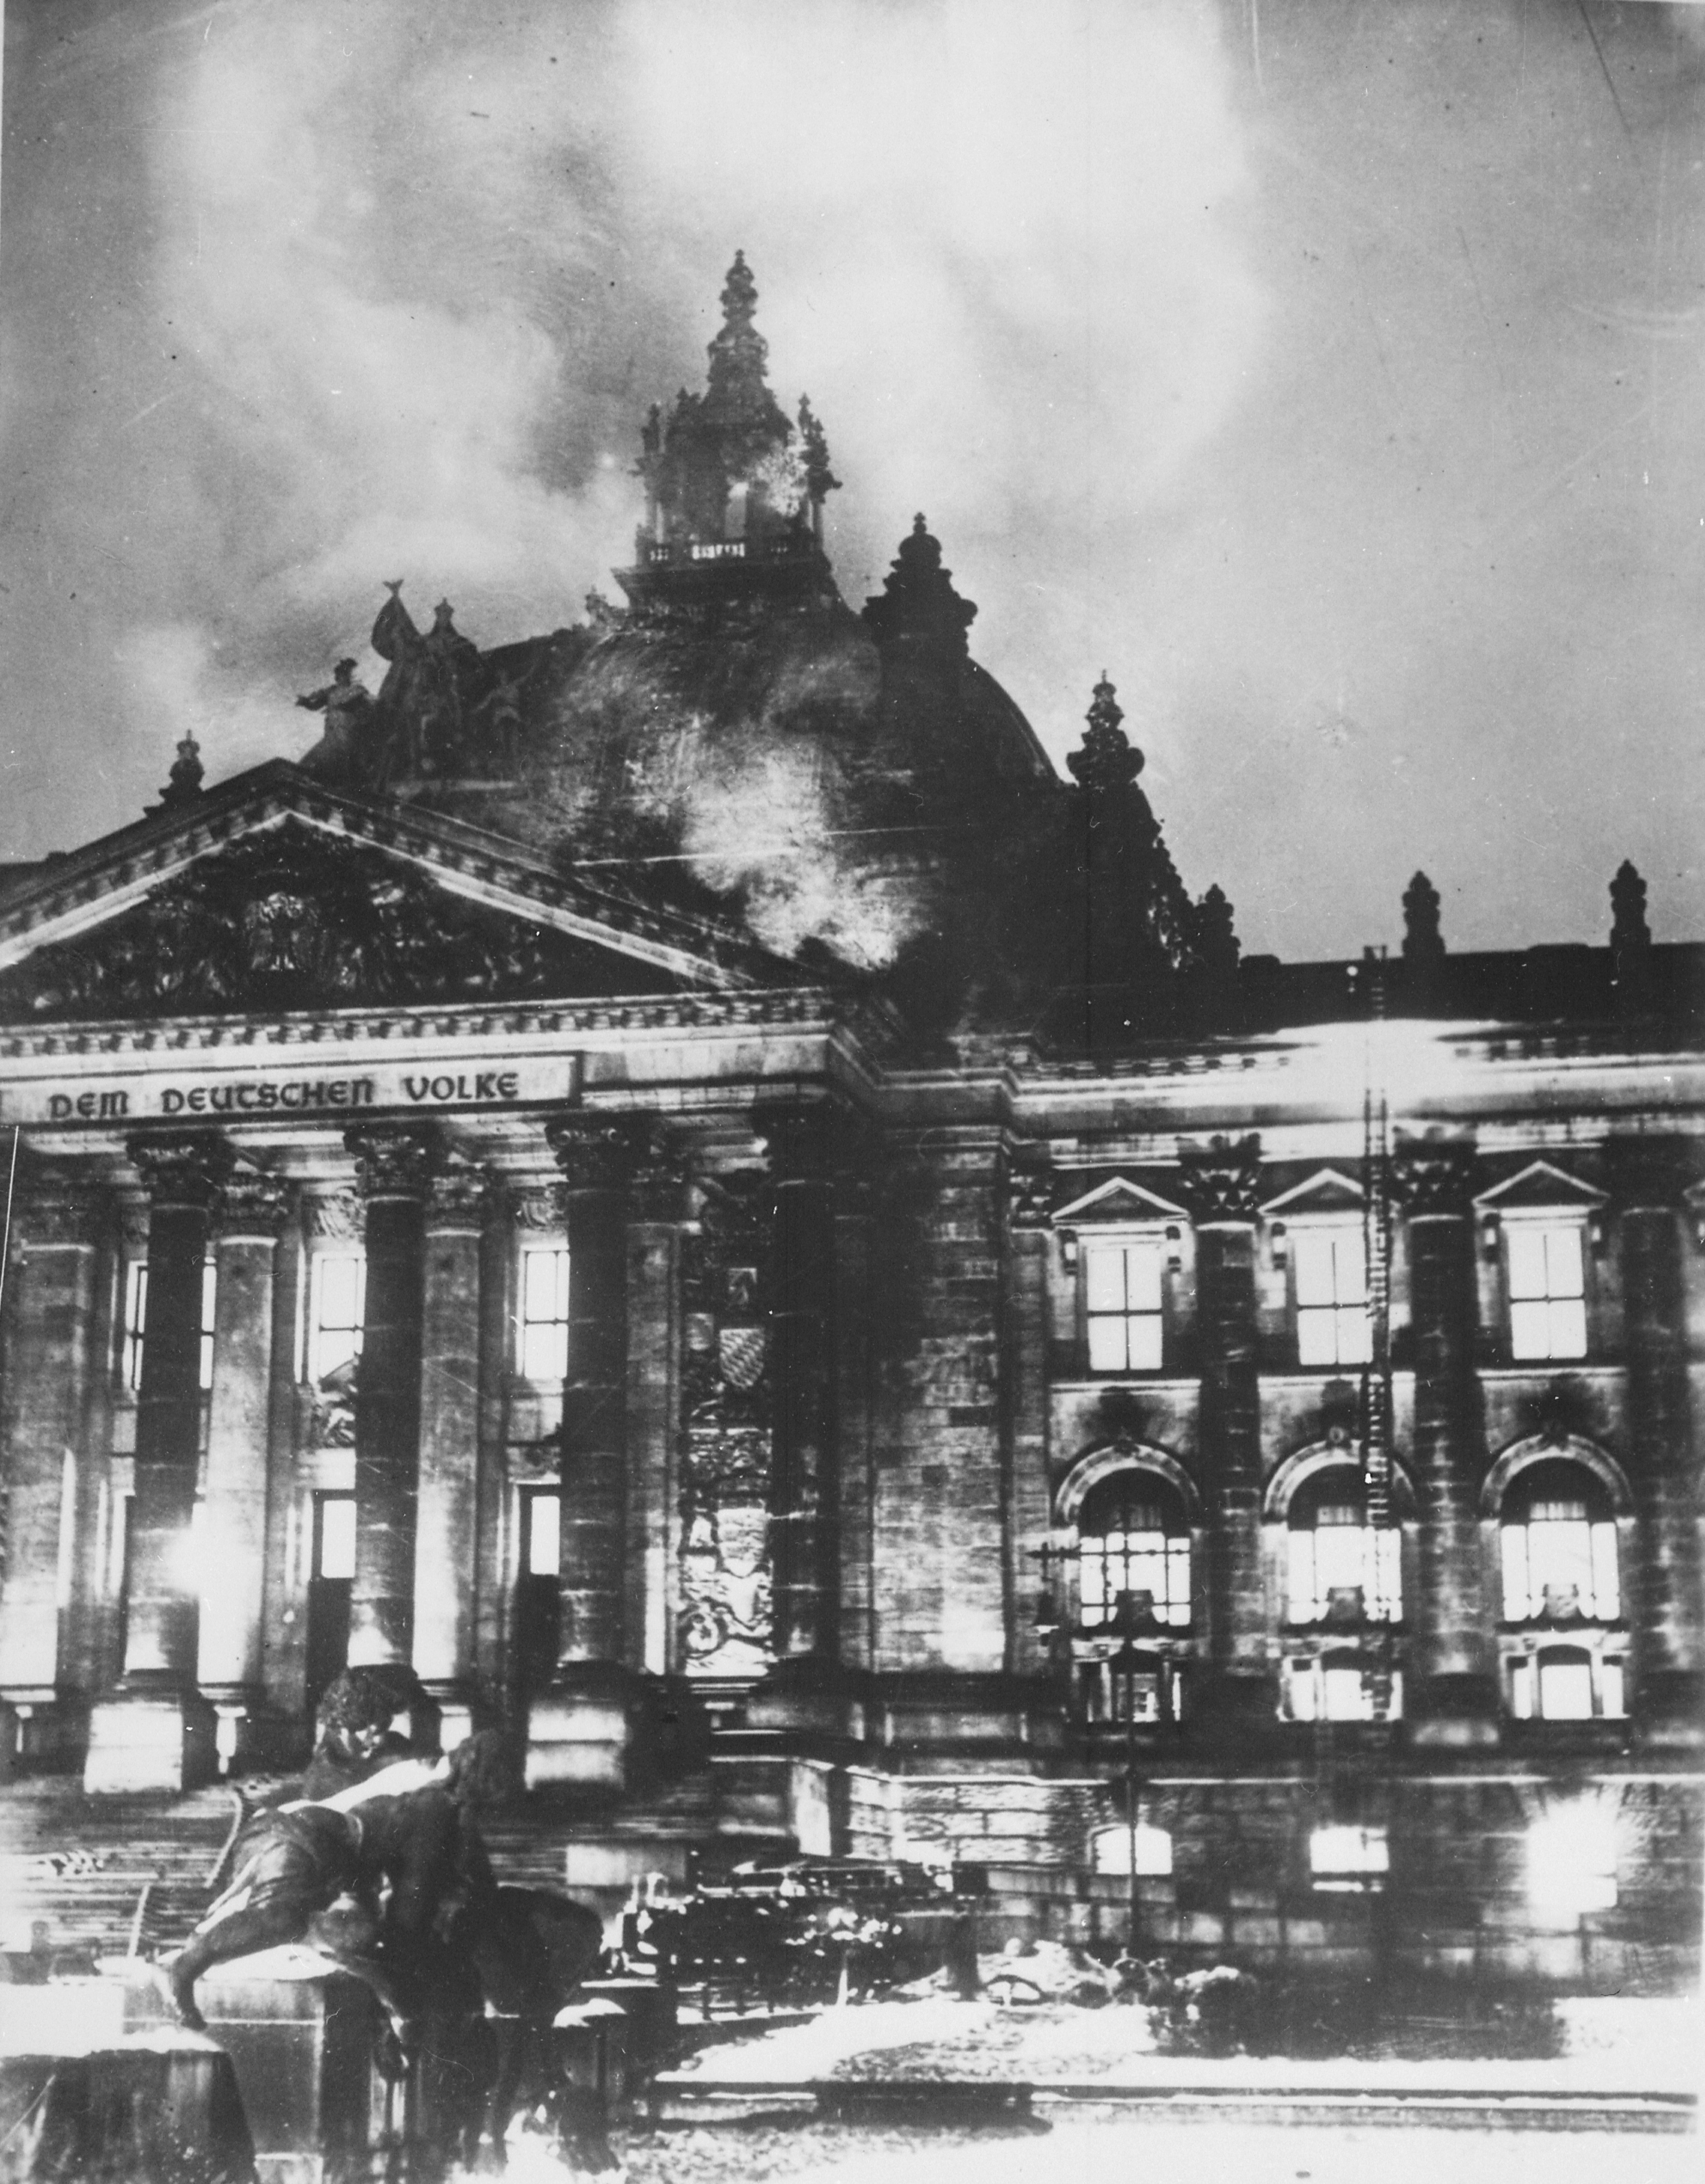 The Reichstag building on fire, Berlin, Germany, 27 Feb 1933